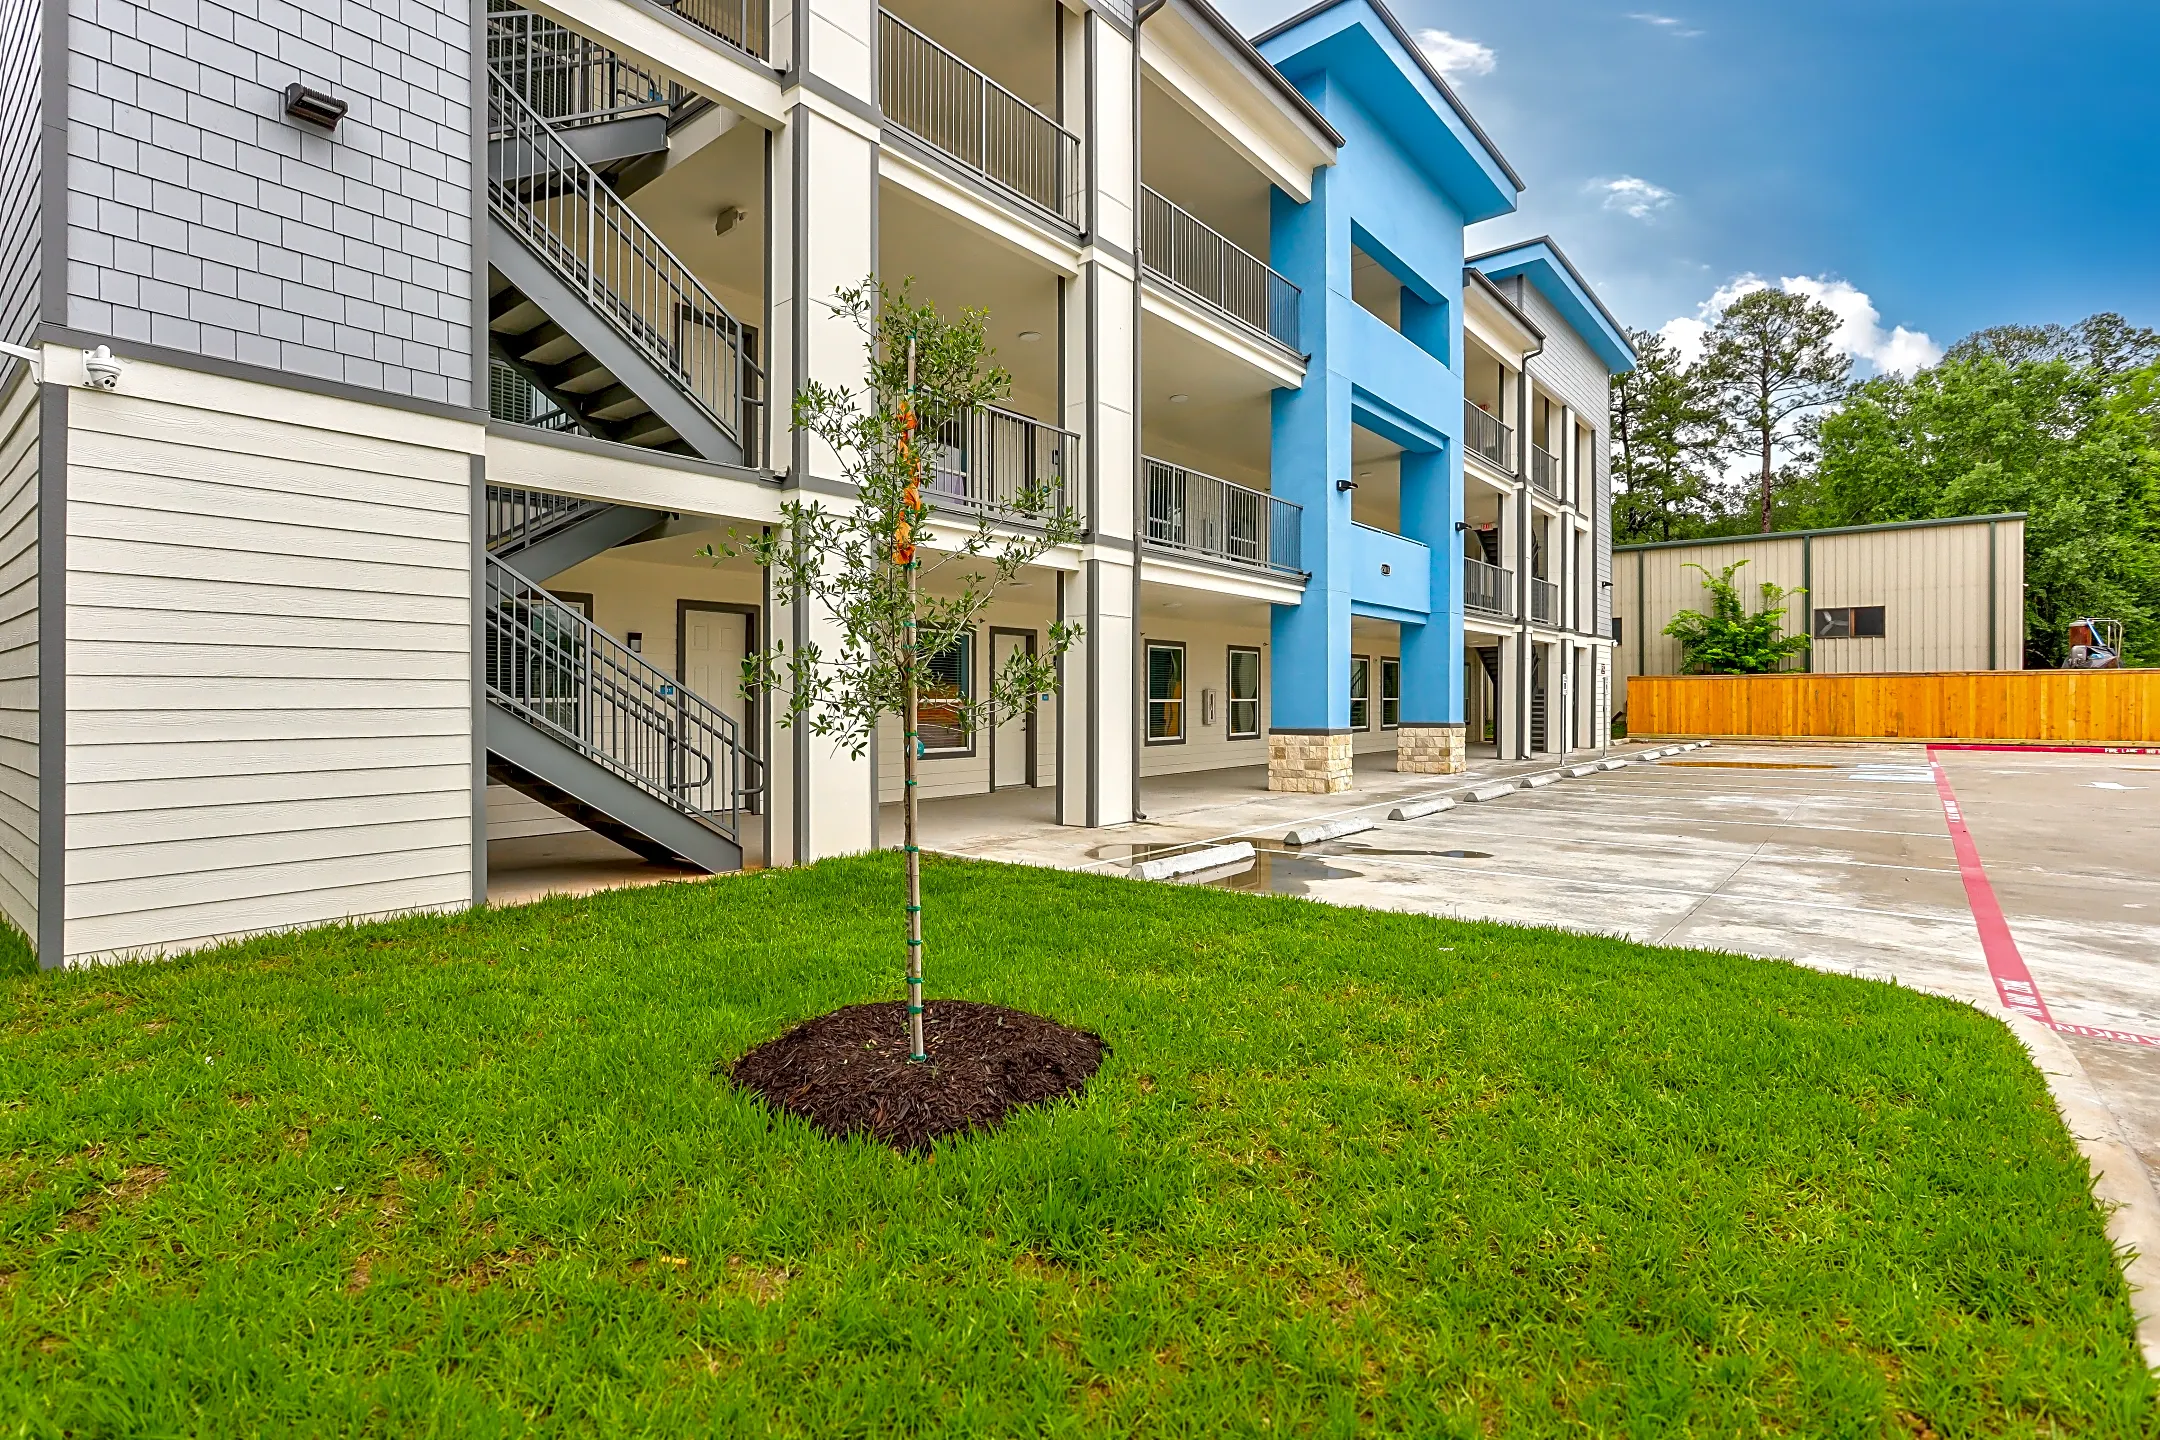 Building - Azul Apartments - The Woodlands - Spring, TX